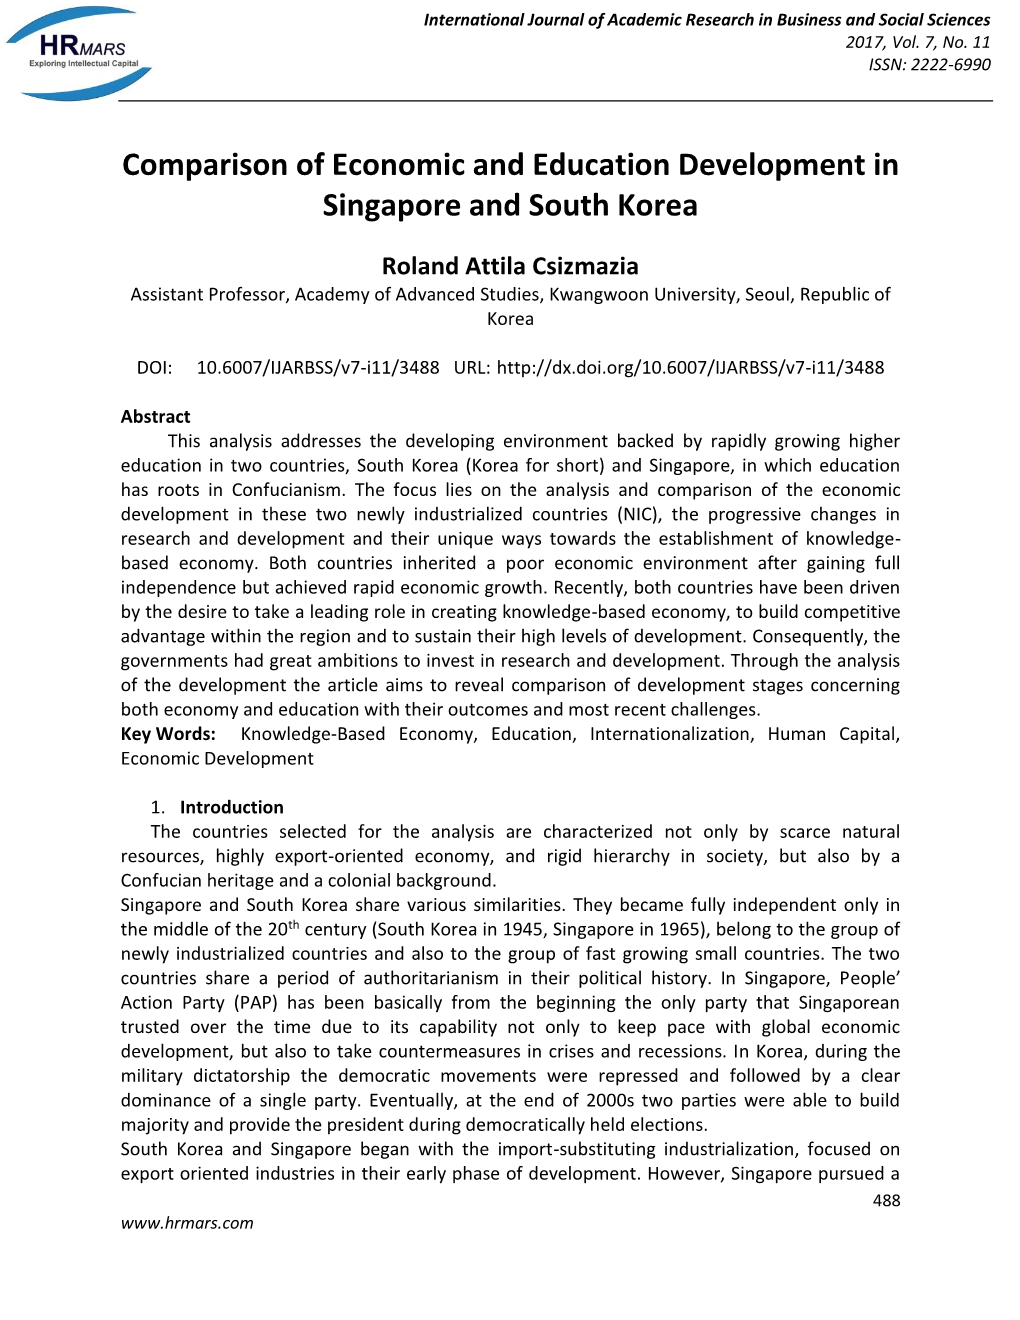 Comparison of Economic and Education Development in Singapore and South Korea